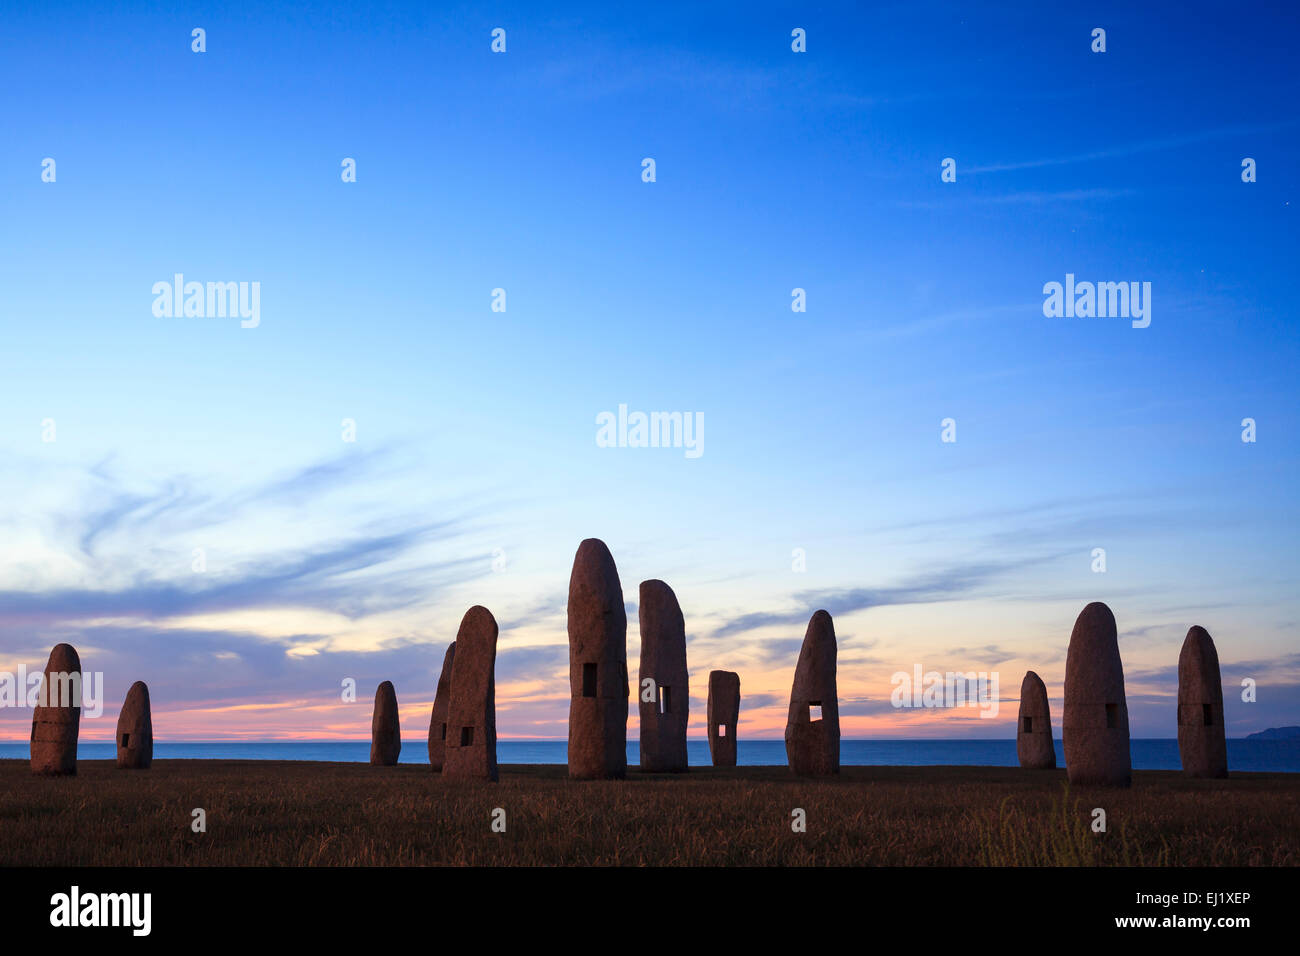 Menhir Monuments by Manolo Paz. A Coruña. Galicia. Spain. Stock Photo